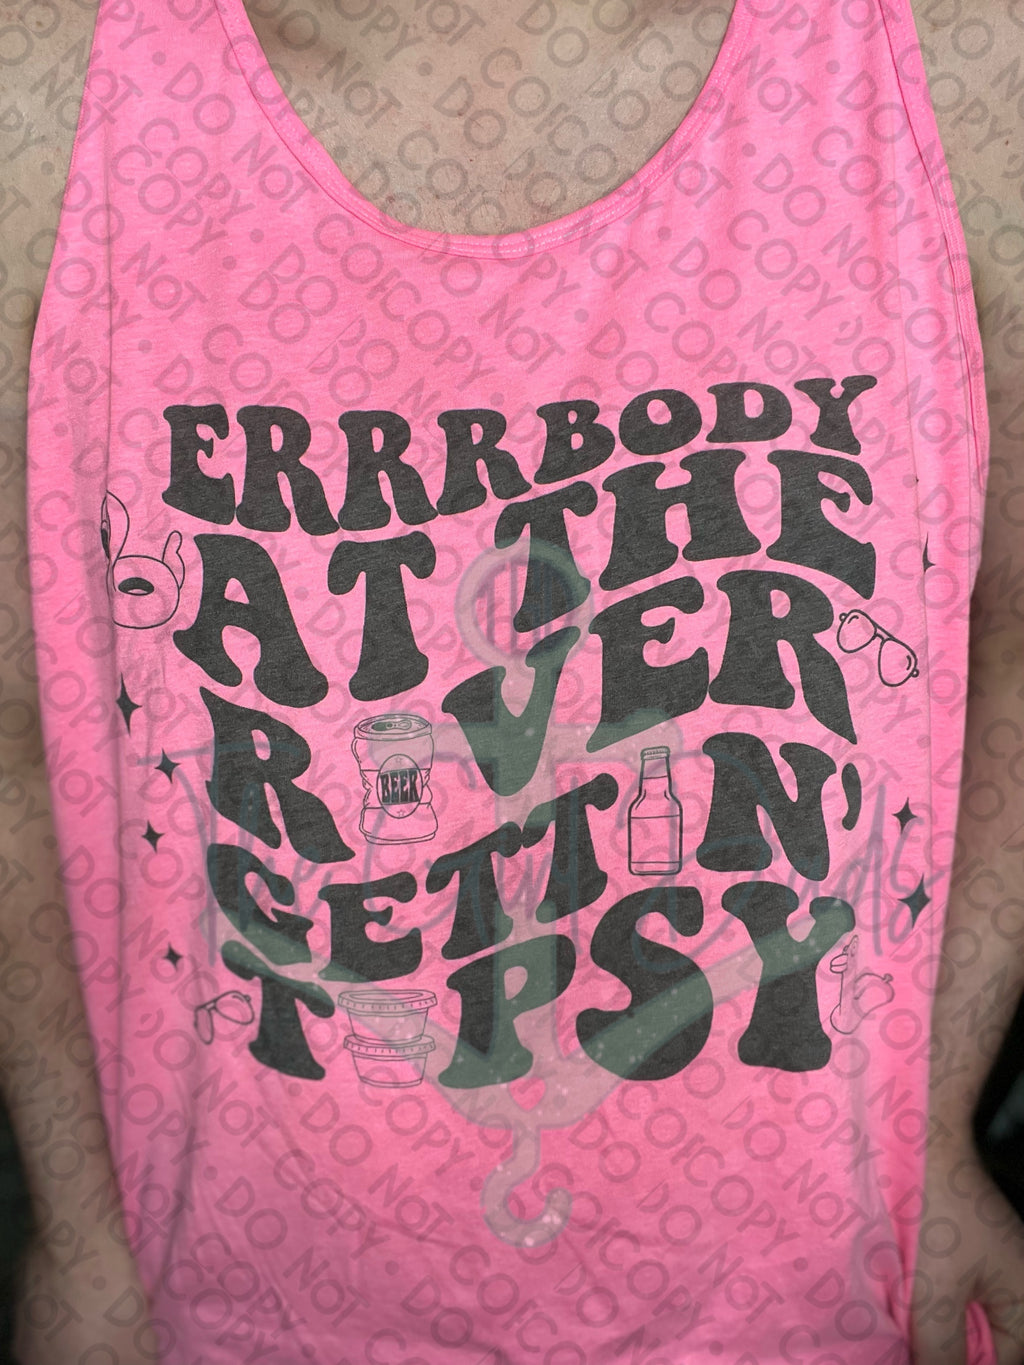 Errrbody At The River Gettin Tipsy (Front & Back) Top Design